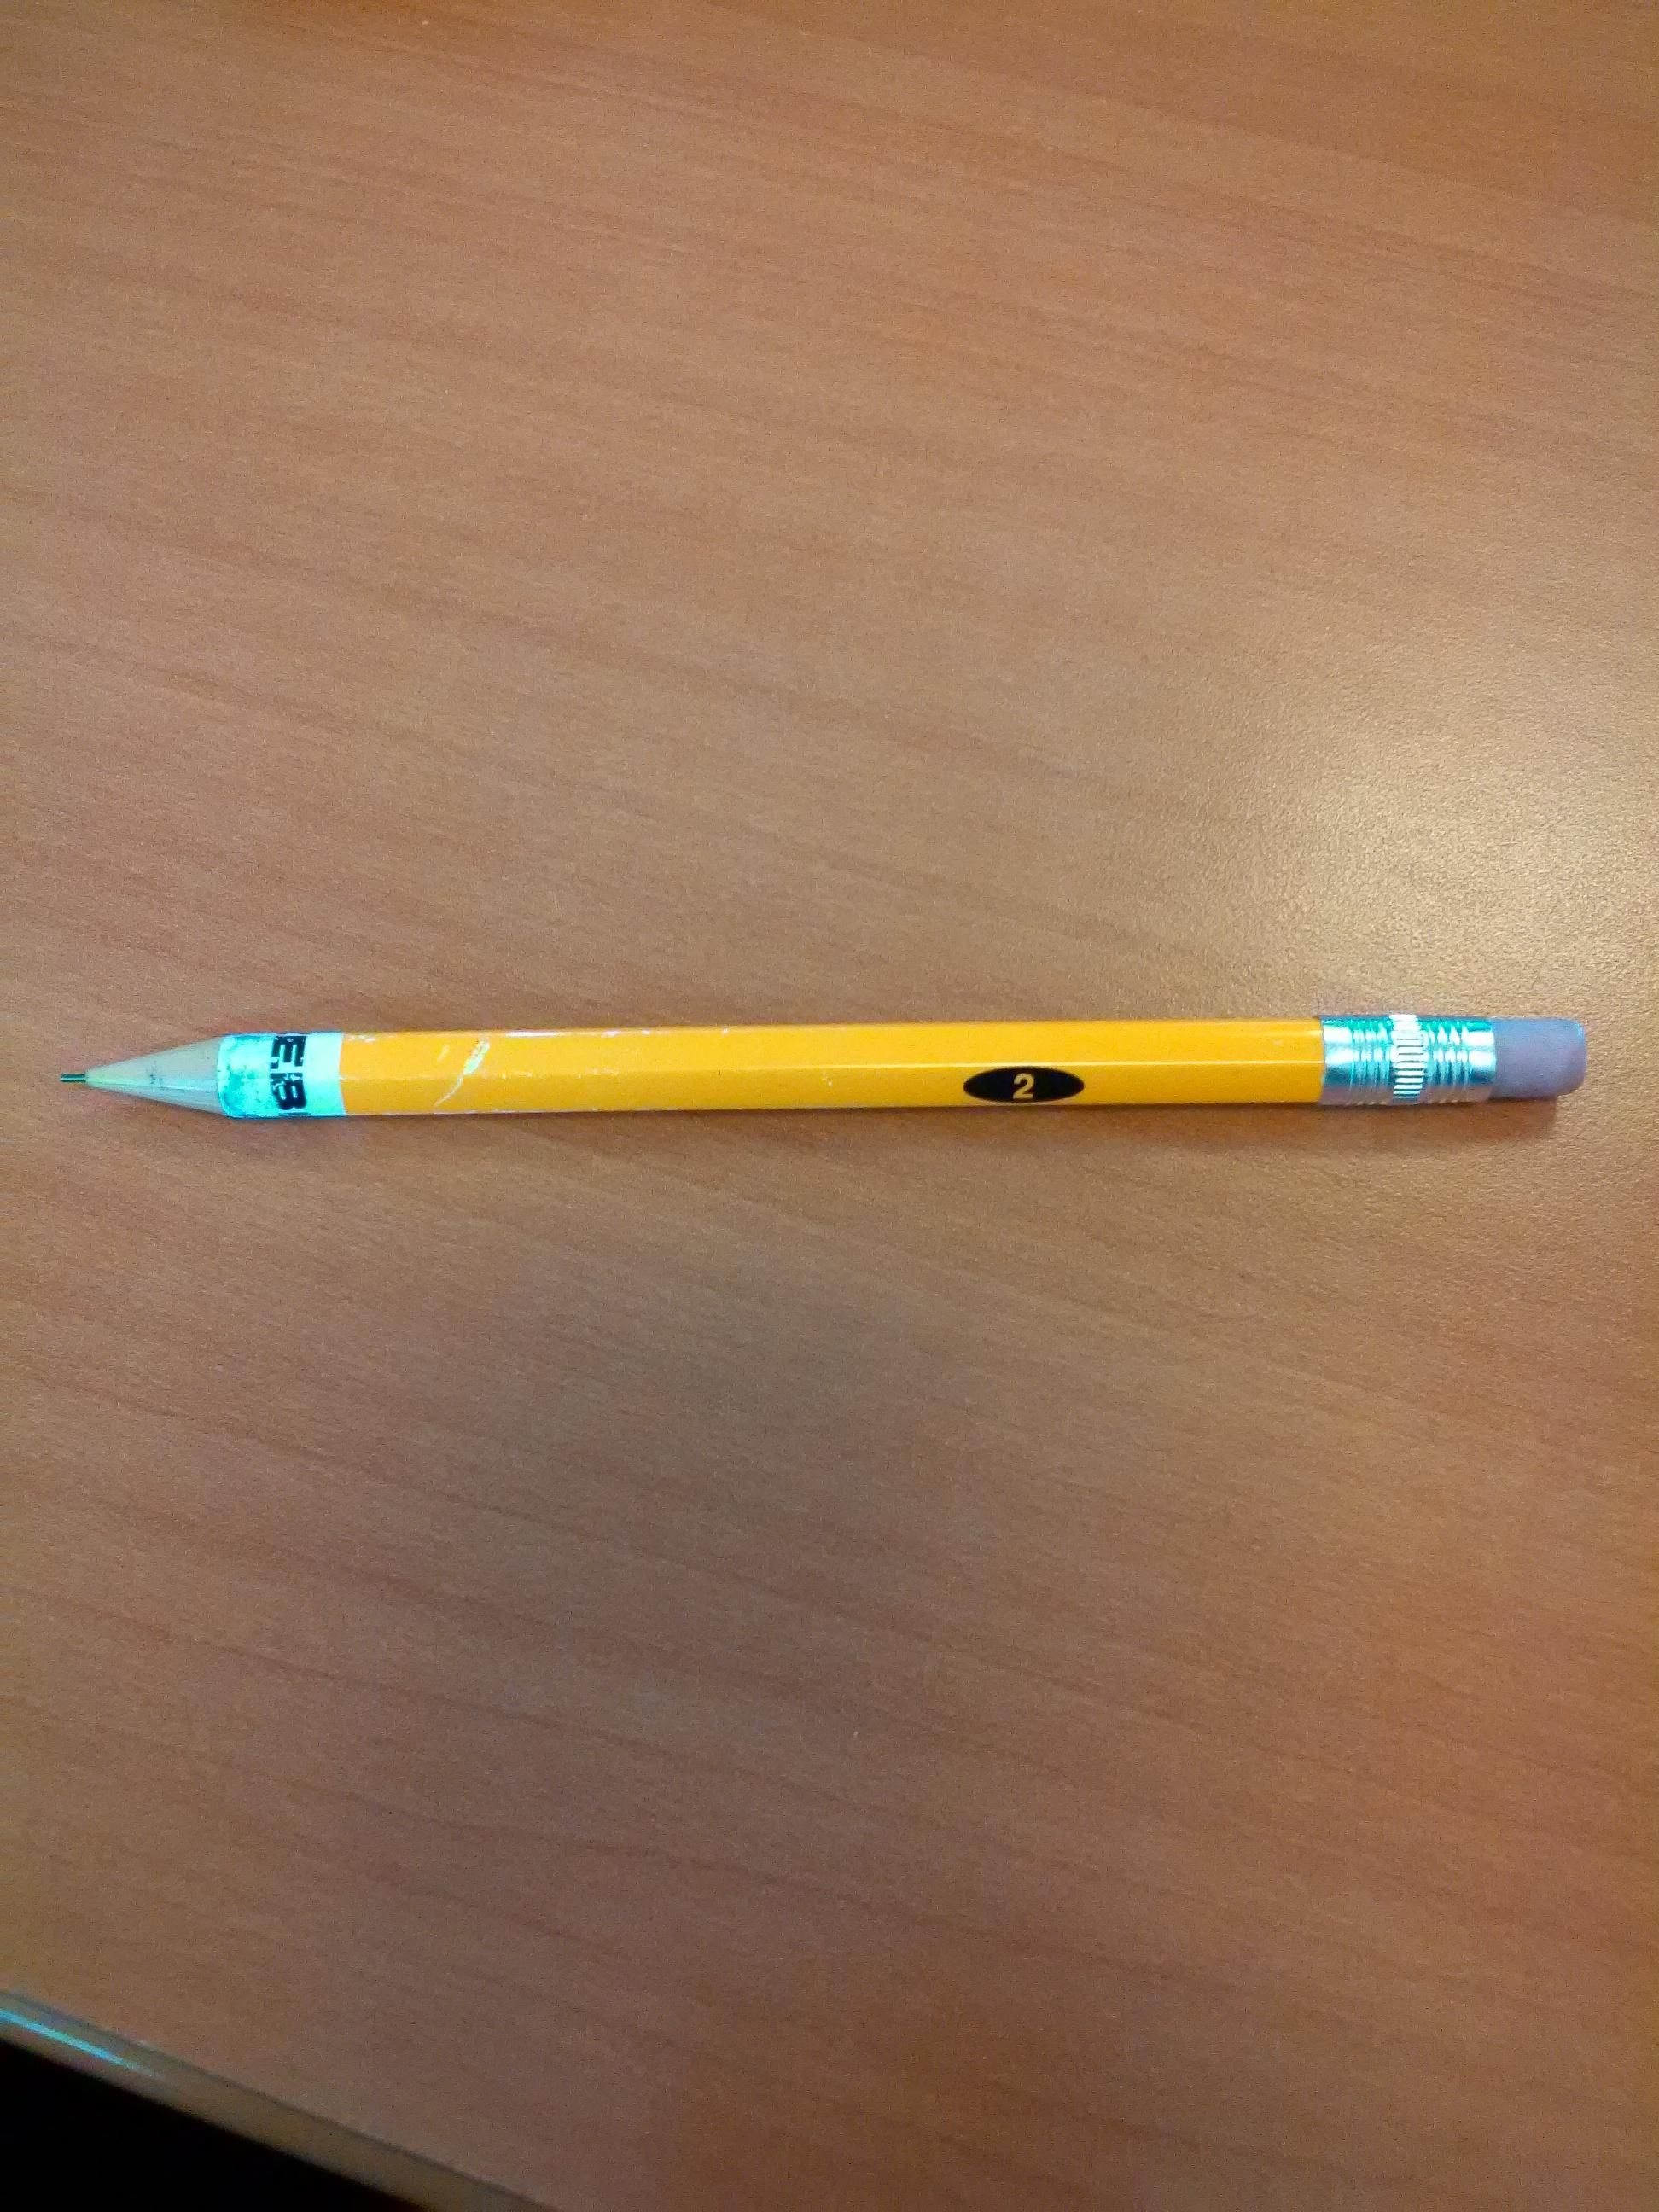 This mechanical pencil that looks like a real pencil | Interesting ...